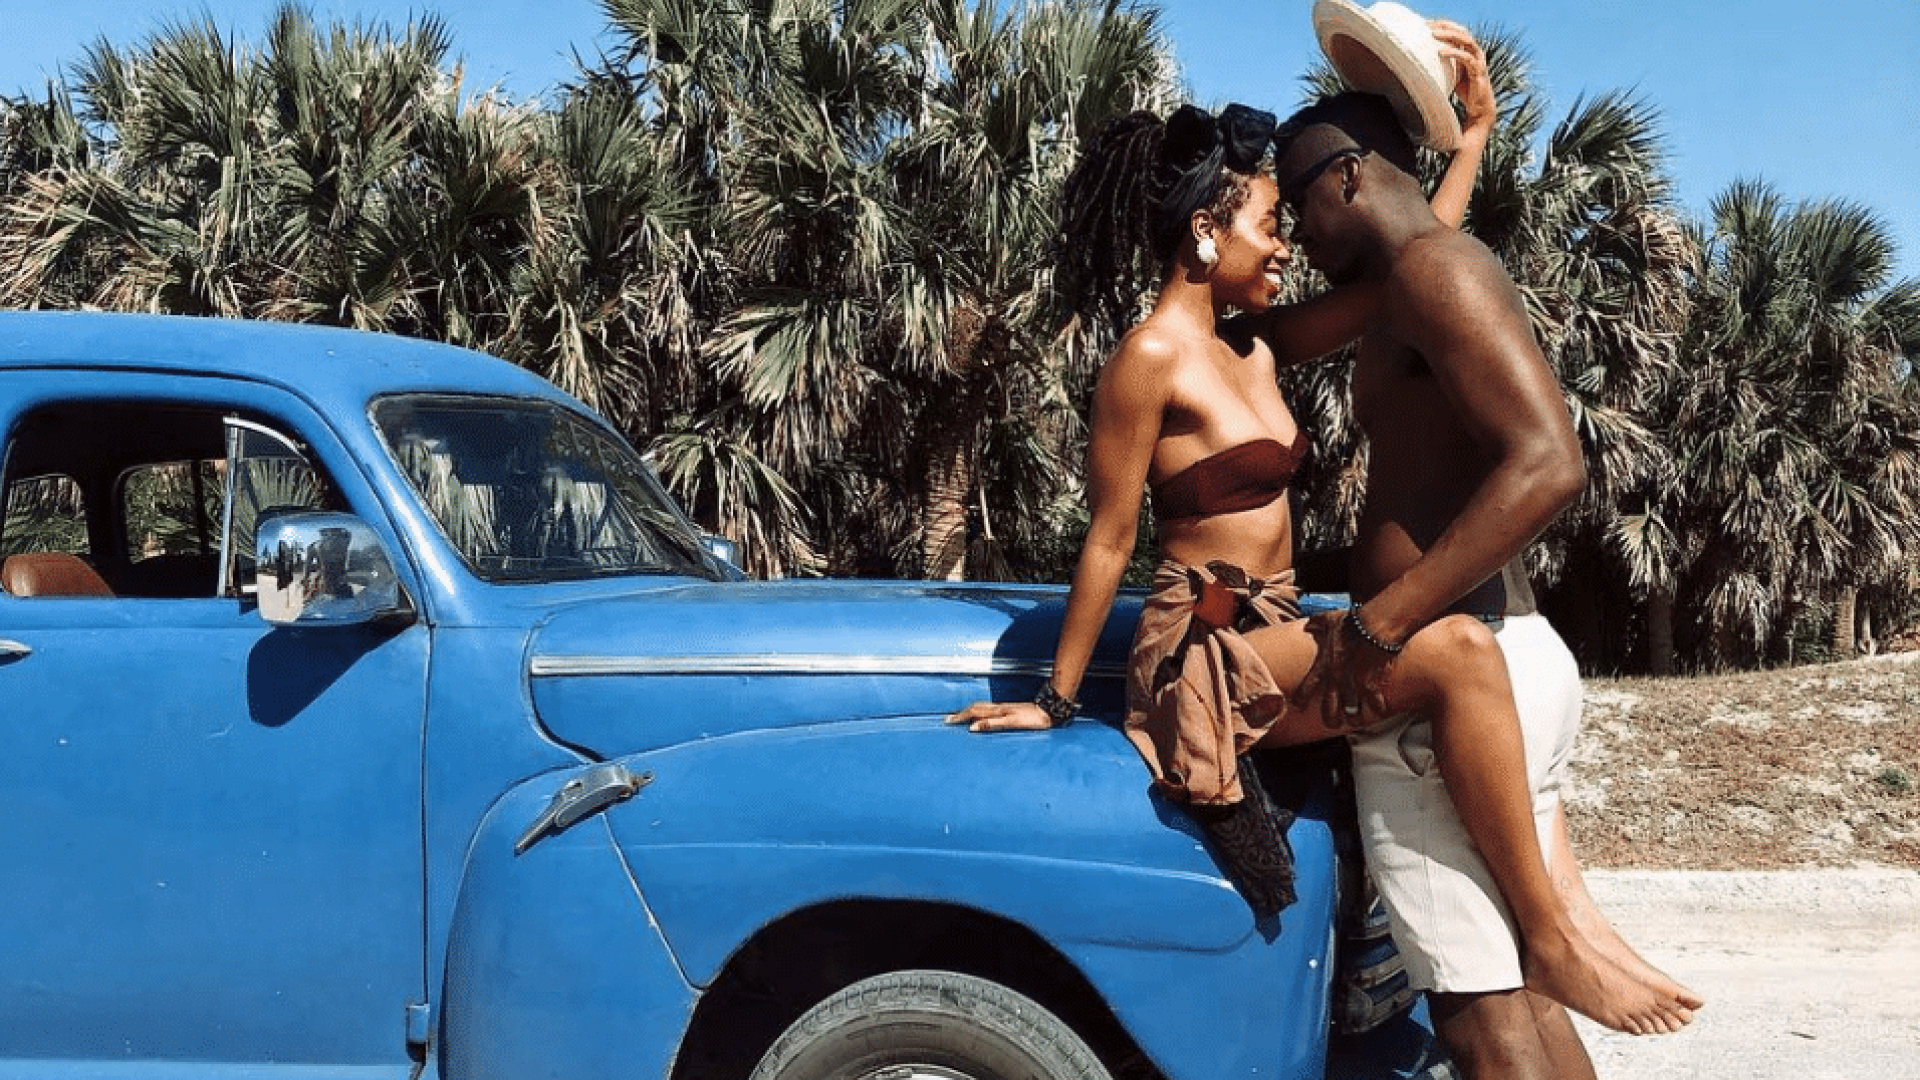 Black Travel Moment Of The Day: This Couple's Sexy Cuban Love Is Making Us Hot